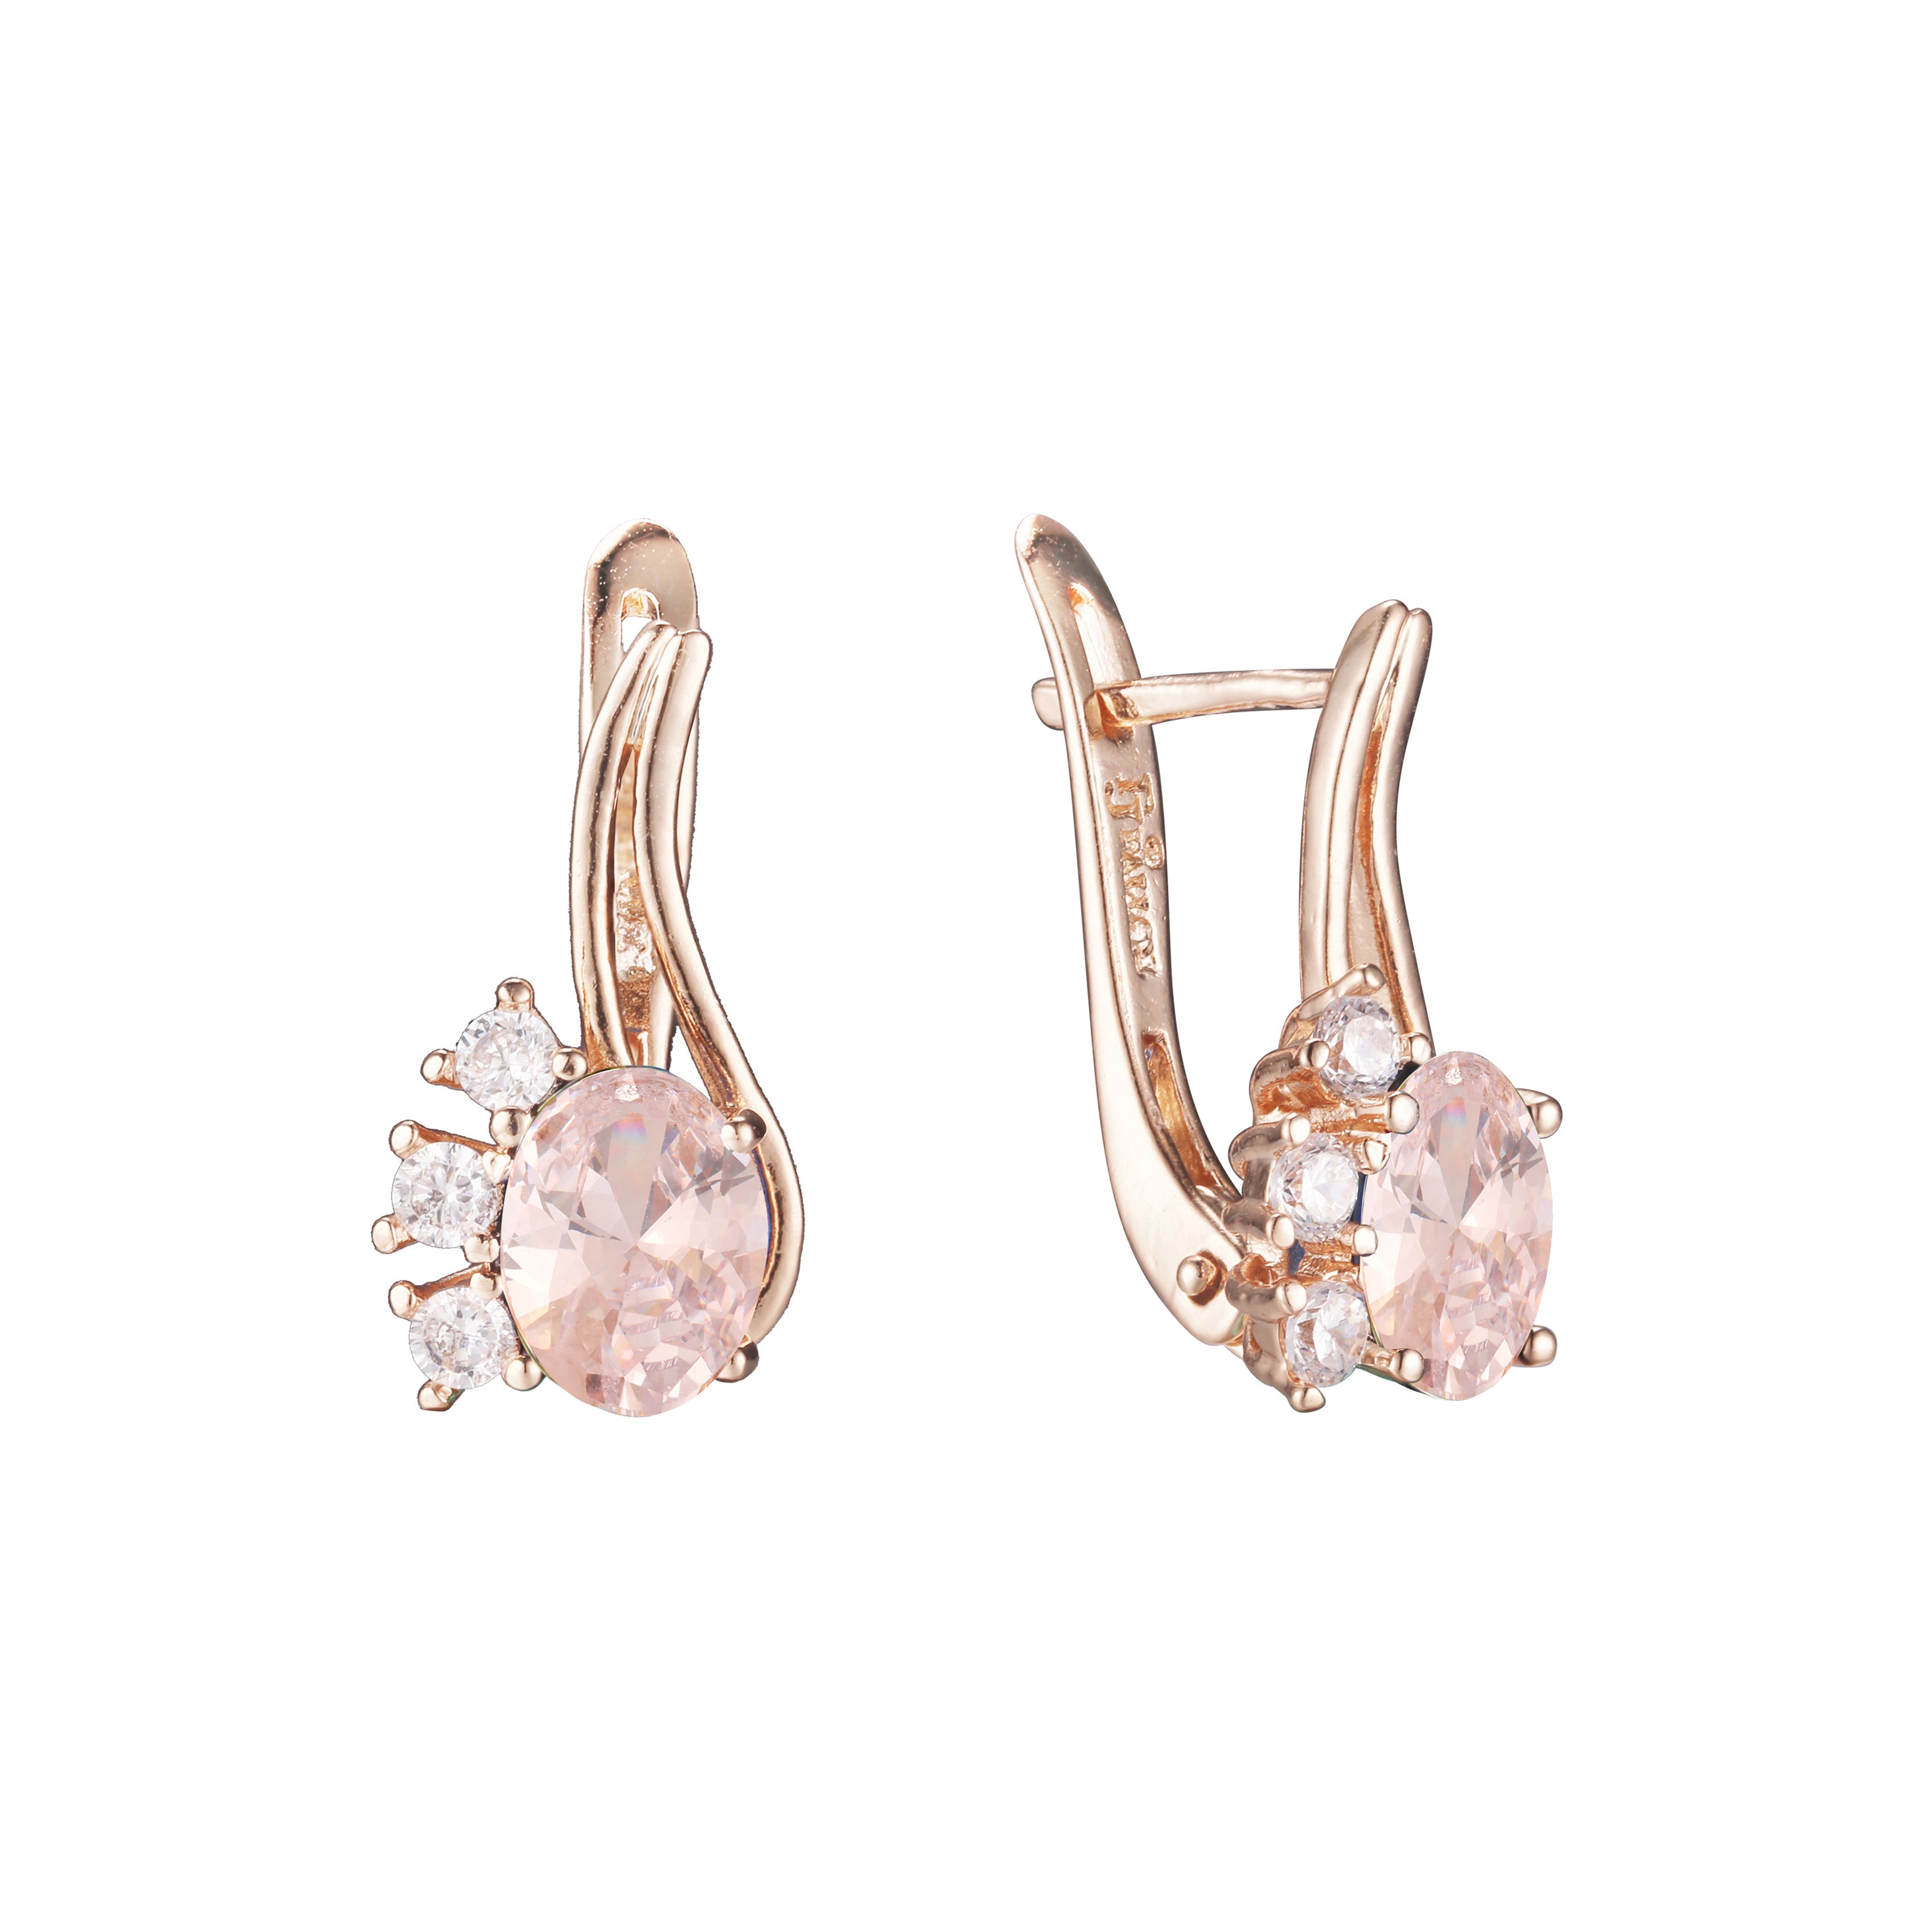 Solitaire sided with three stones earrings in 14K Gold, Rose Gold plating colors